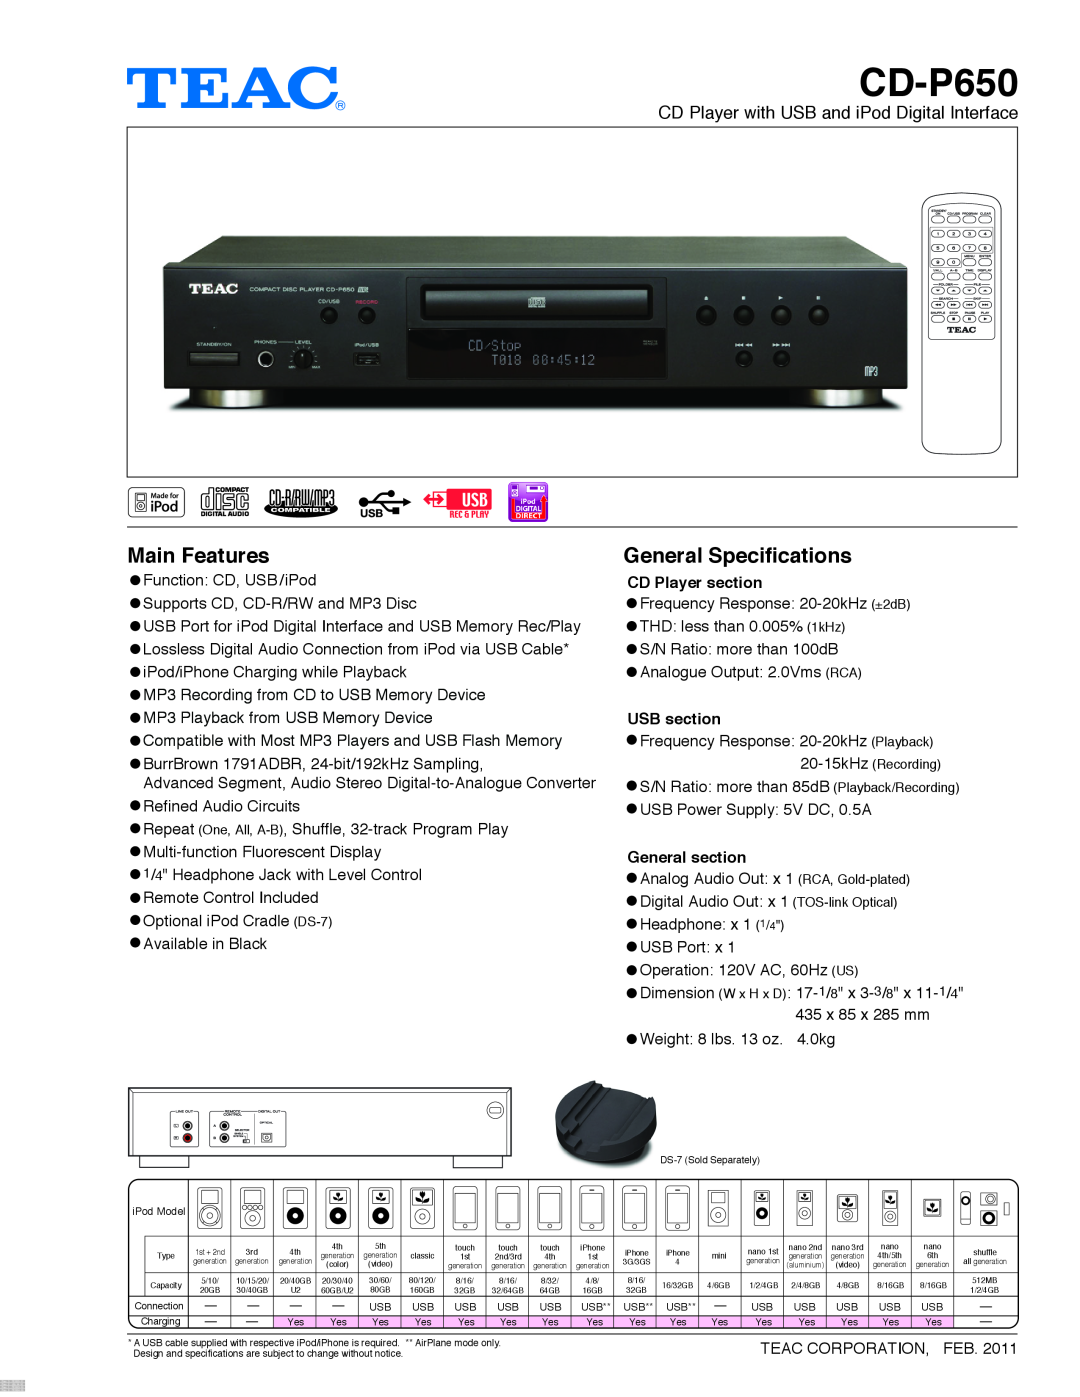 Teac CD-P650 specifications Main Features, General Specifications, CD Player with USB and iPod Digital Interface 